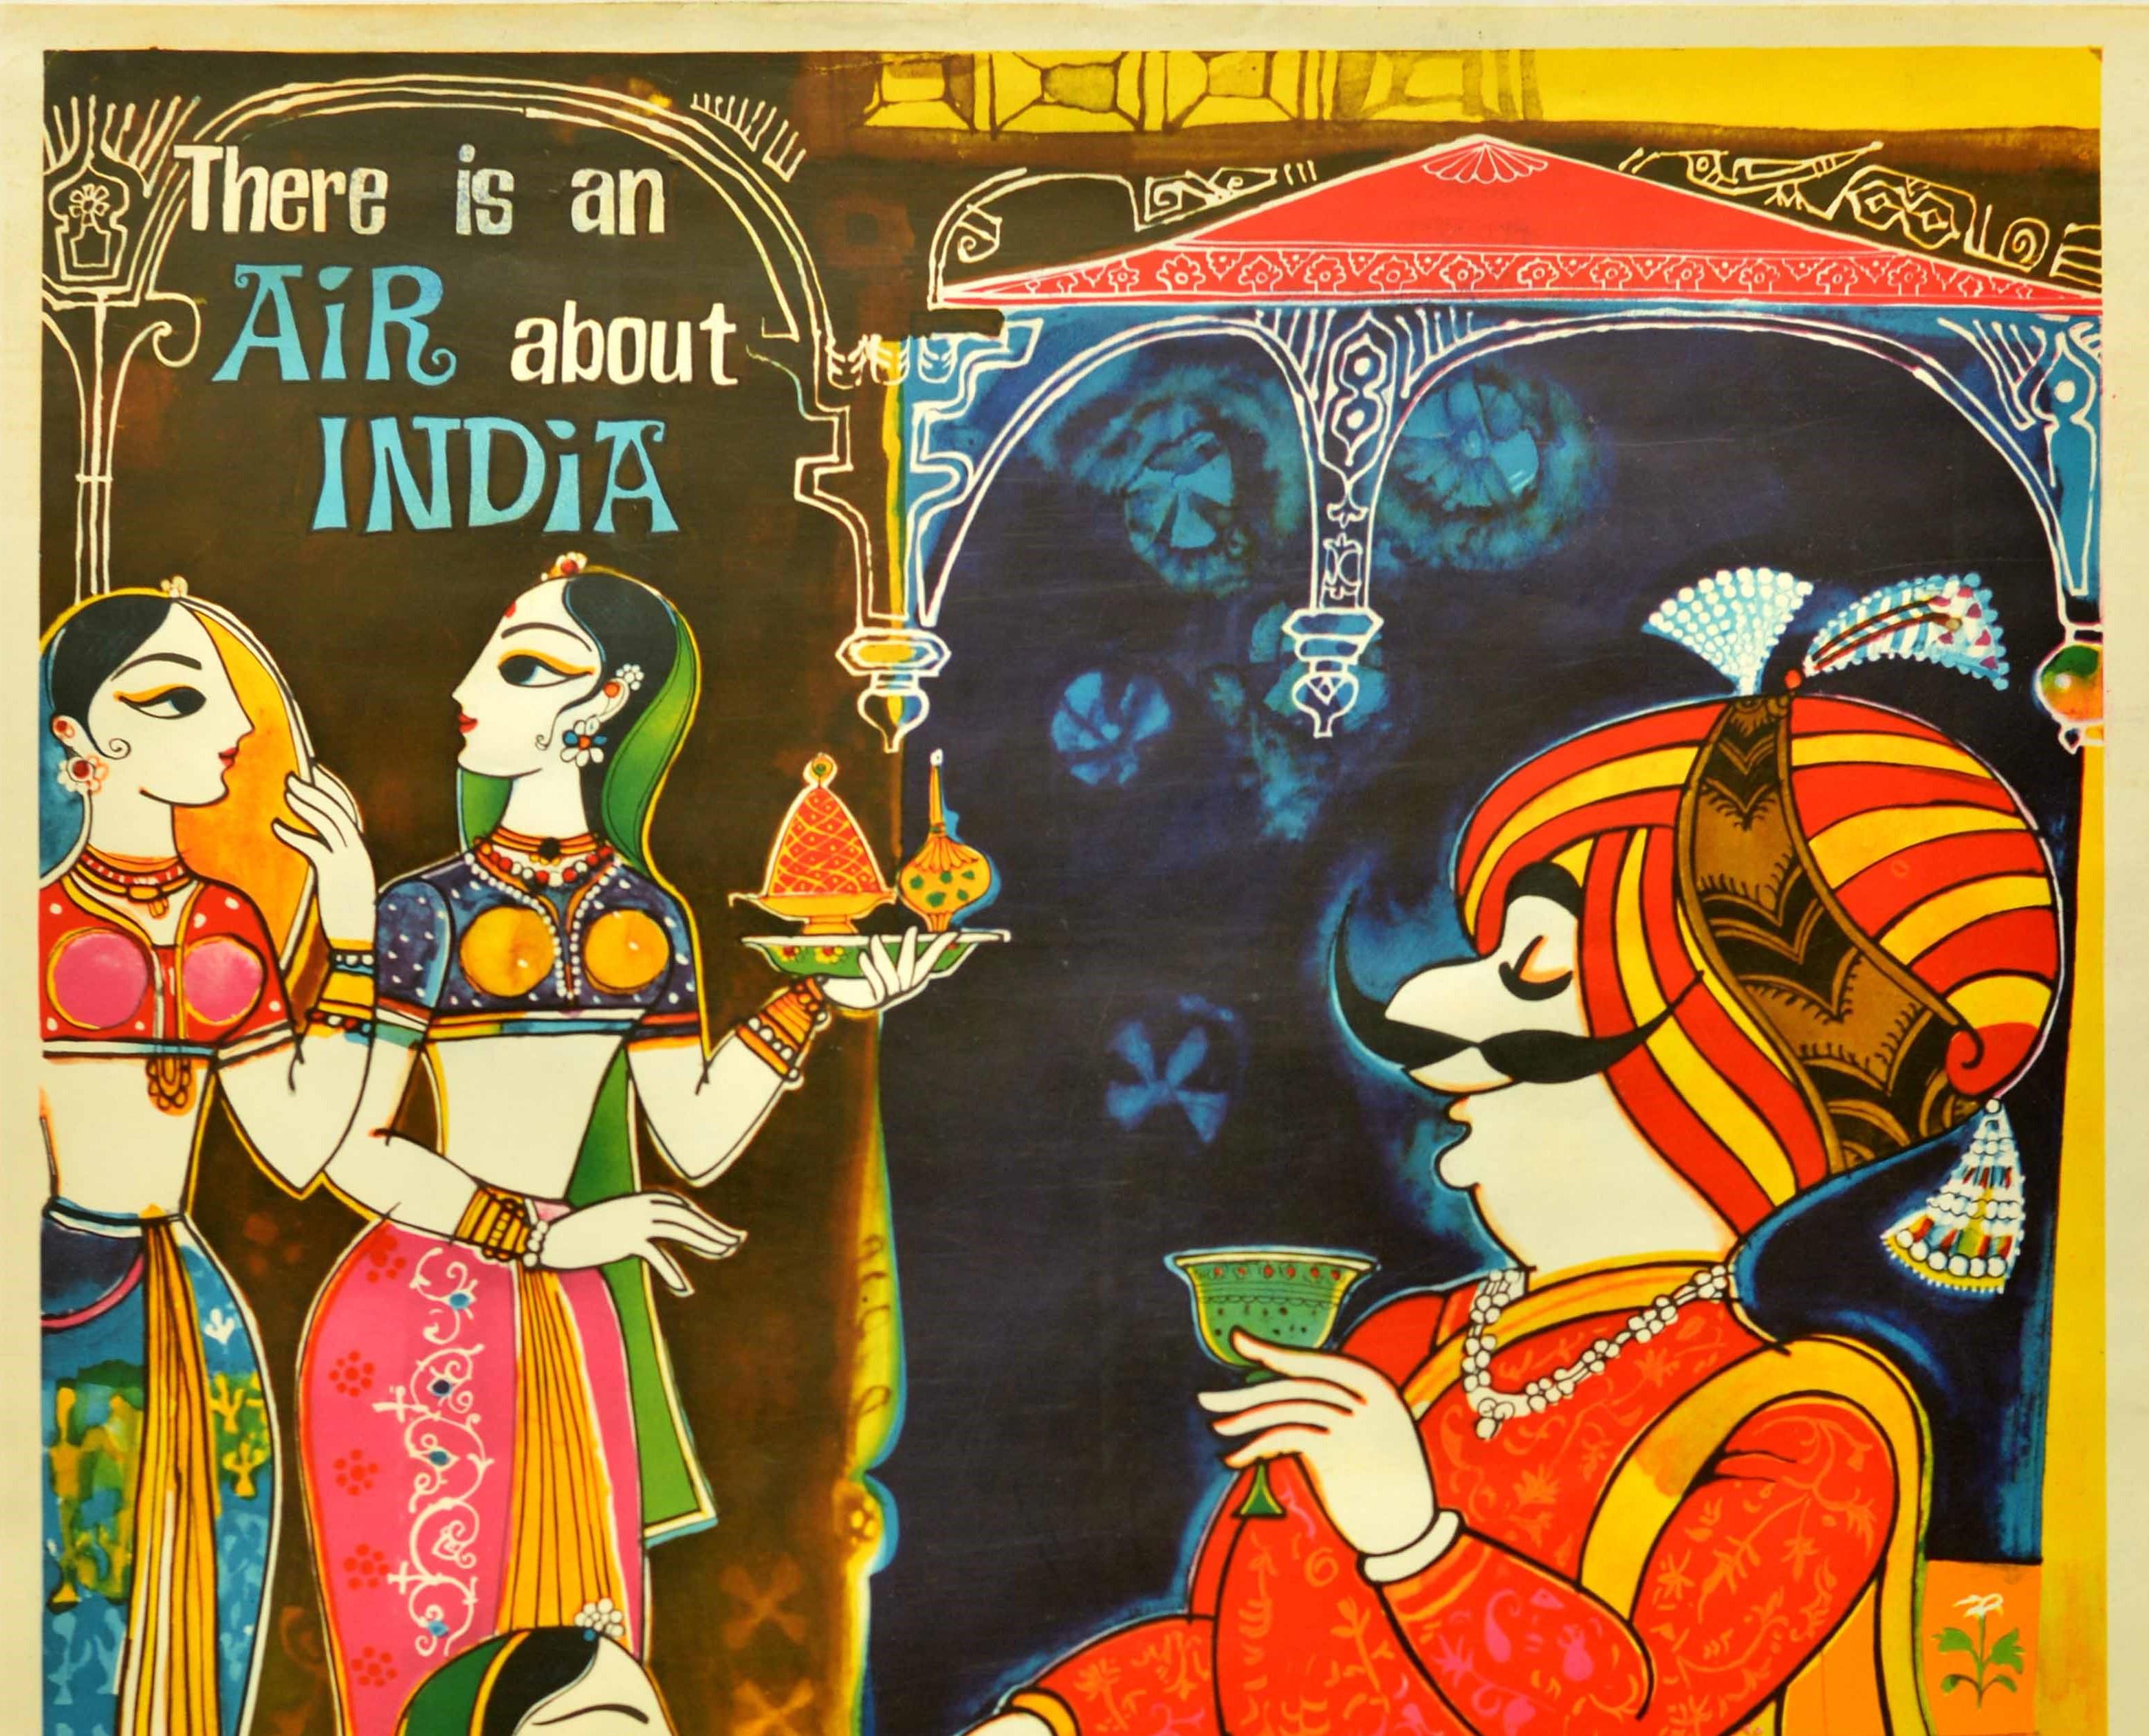 Original Vintage Air India Travel Poster There Is An Air About India Maharajah - Print by J.B. Cowasji